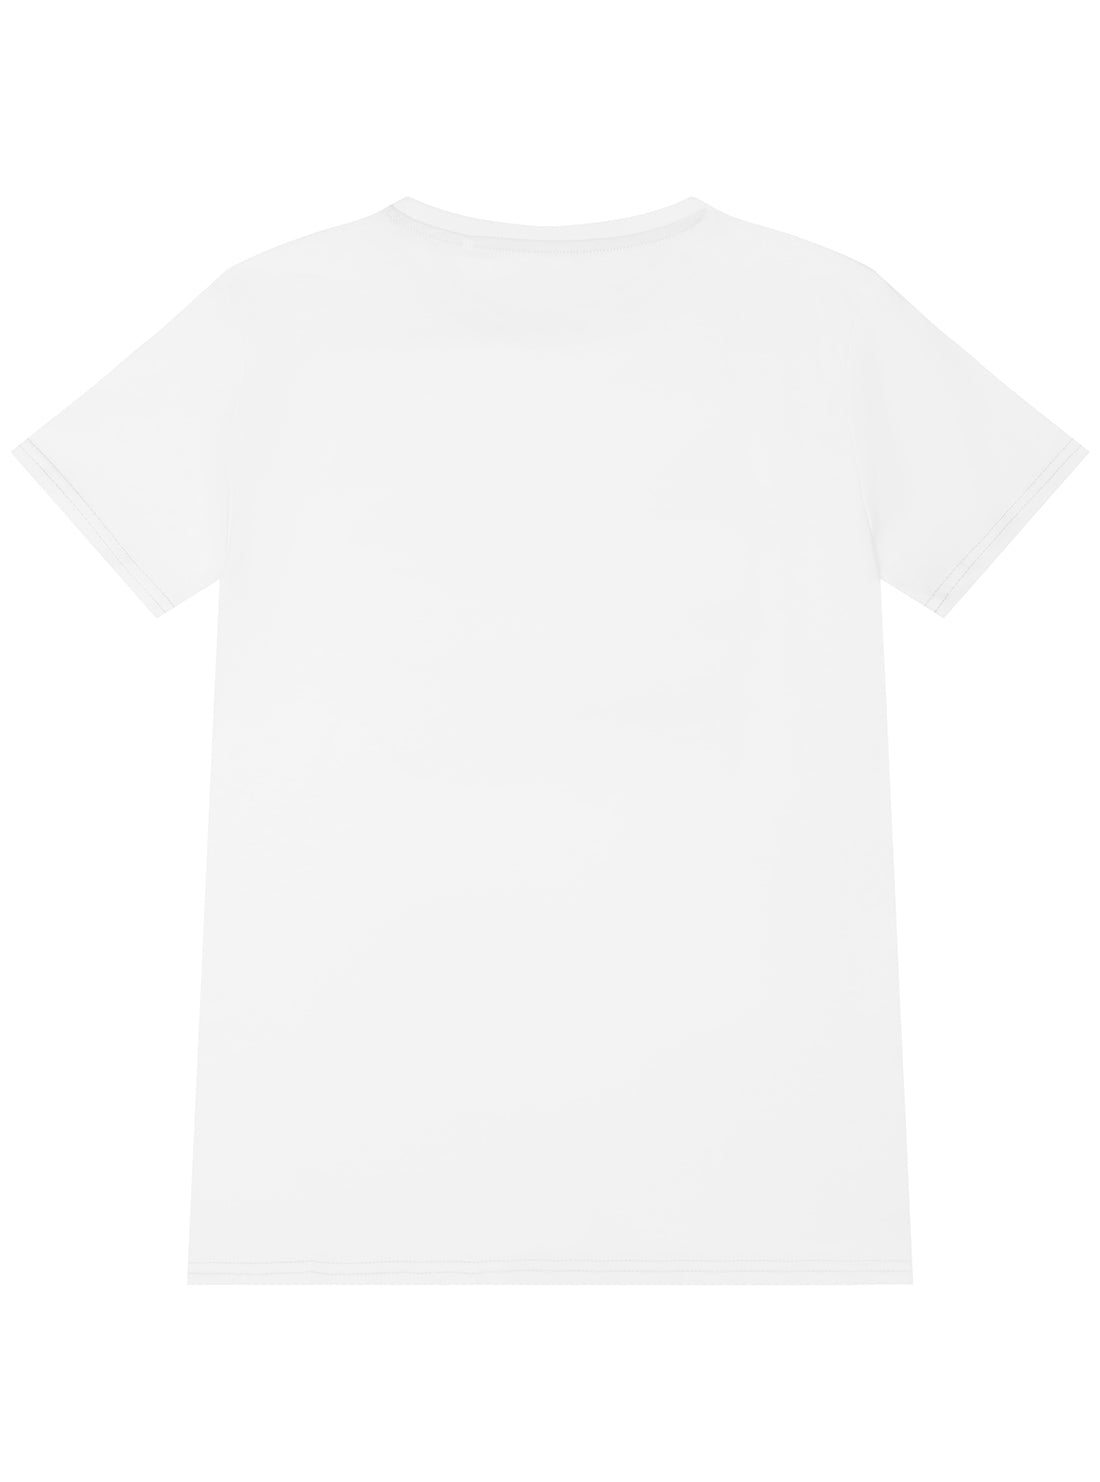 GUESS White Graphic Logo T-Shirt (7-16) back view